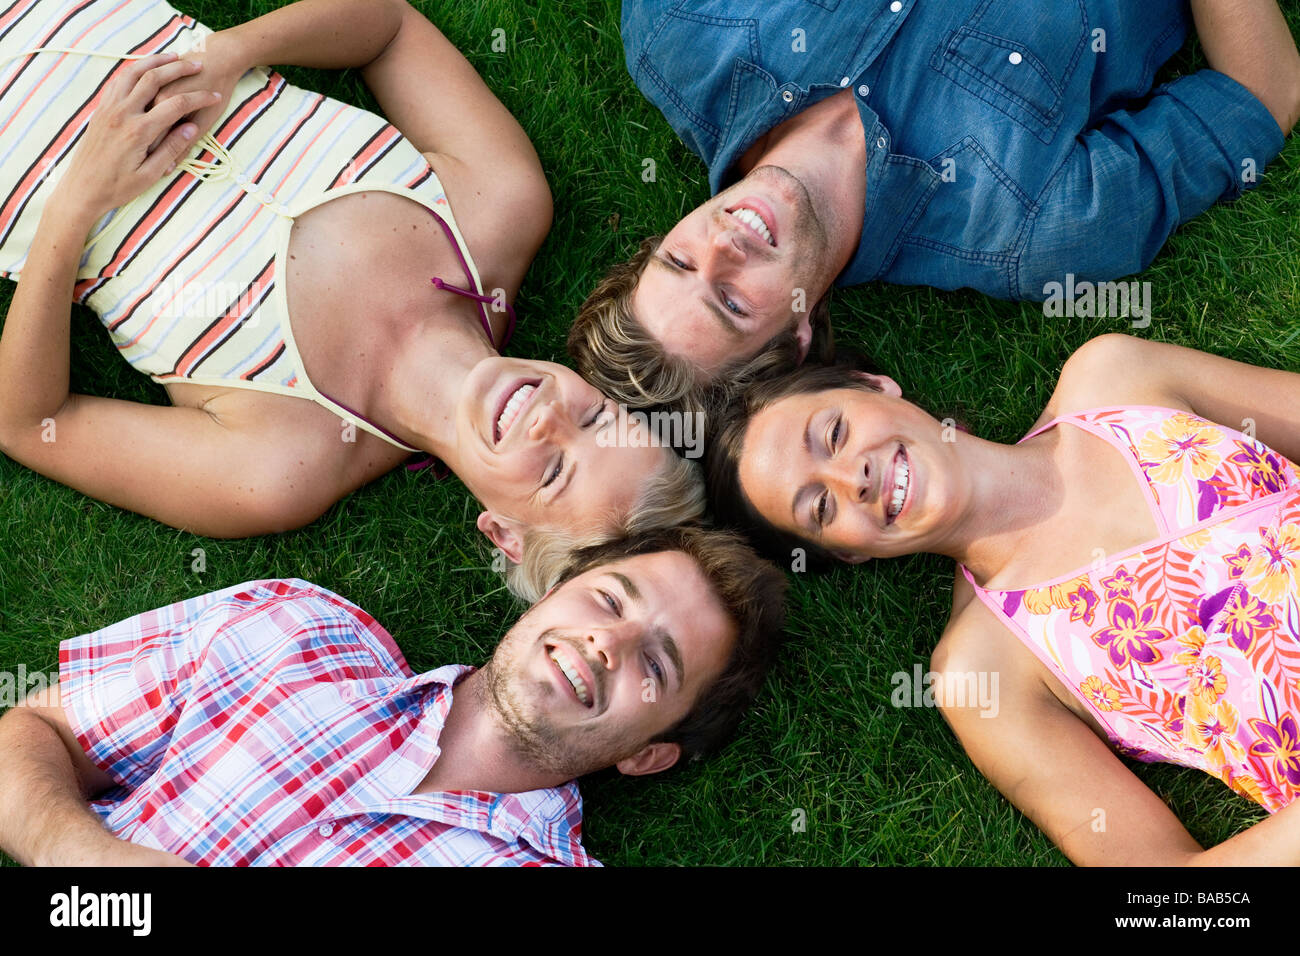 Four people lying on a lawn, Sweden. Stock Photo